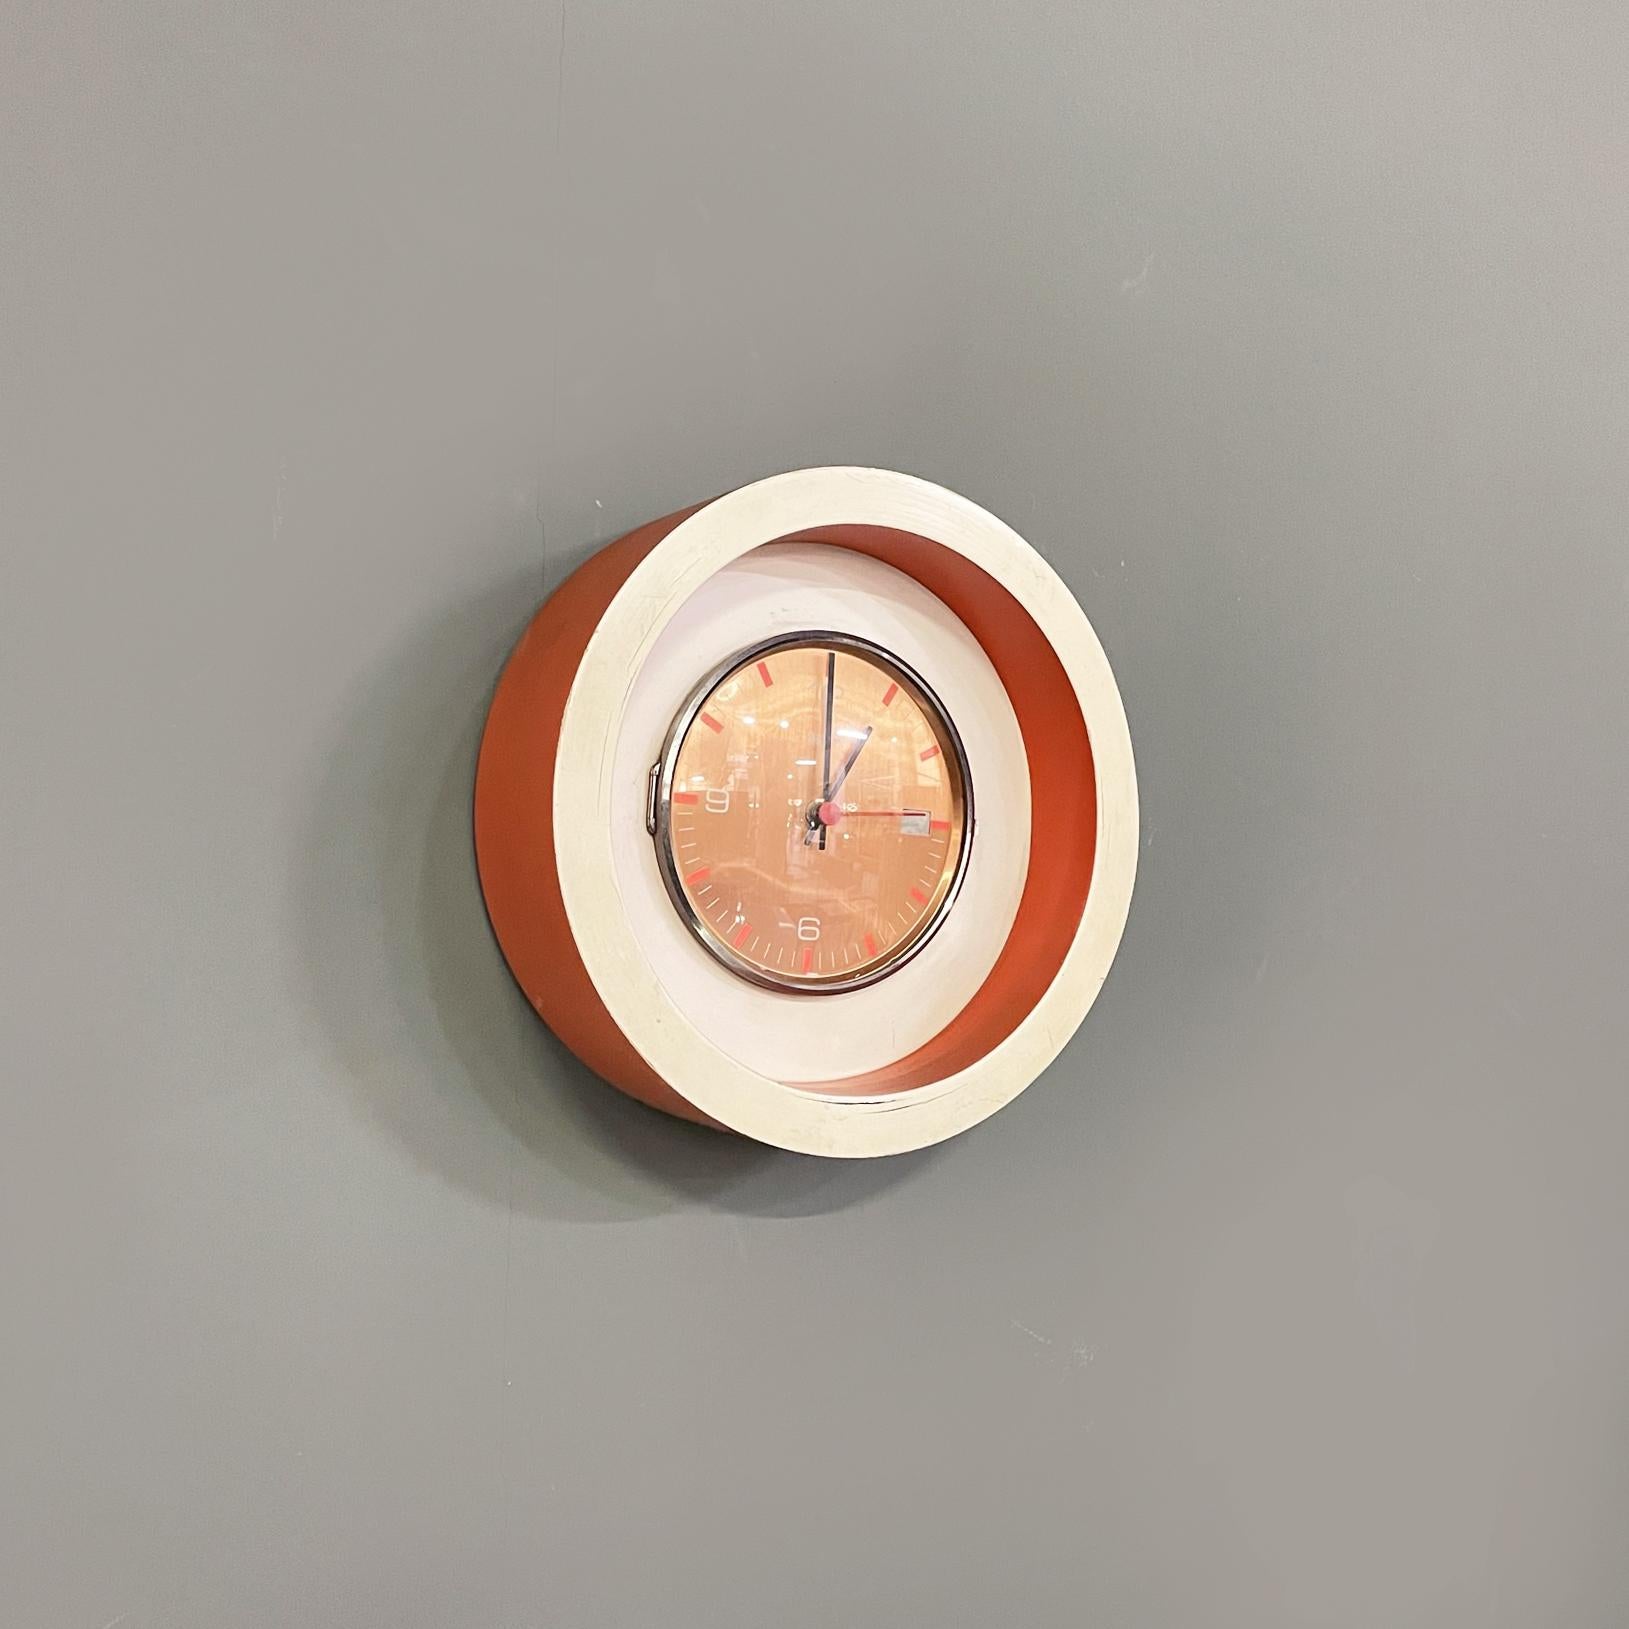 Italian modern Wall clock in white and orange wood and metal by Astra, 1980s
Round wall clock with thick and protruding wooden frame painted in white and orange. The round dial is in copper-colored metal with black hands. The plastic part above the